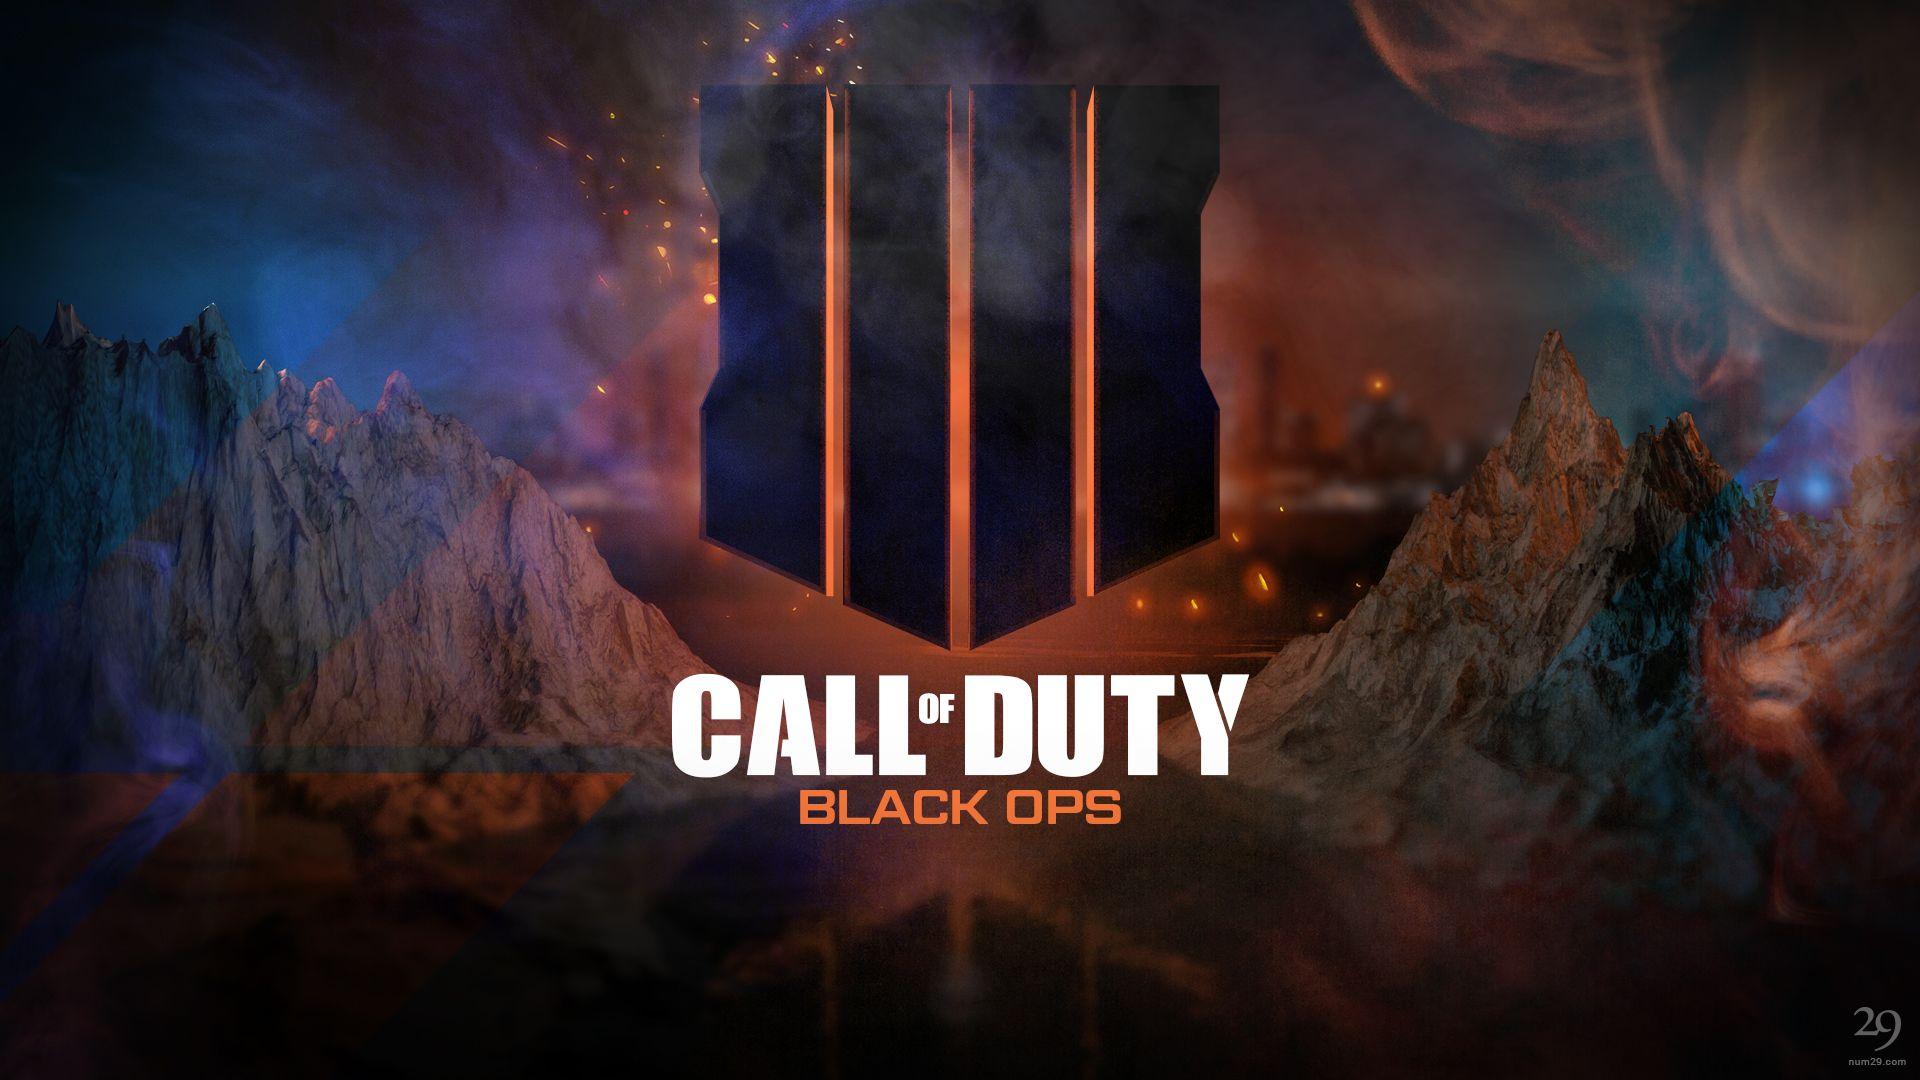 8 call of duty black ops 4 images